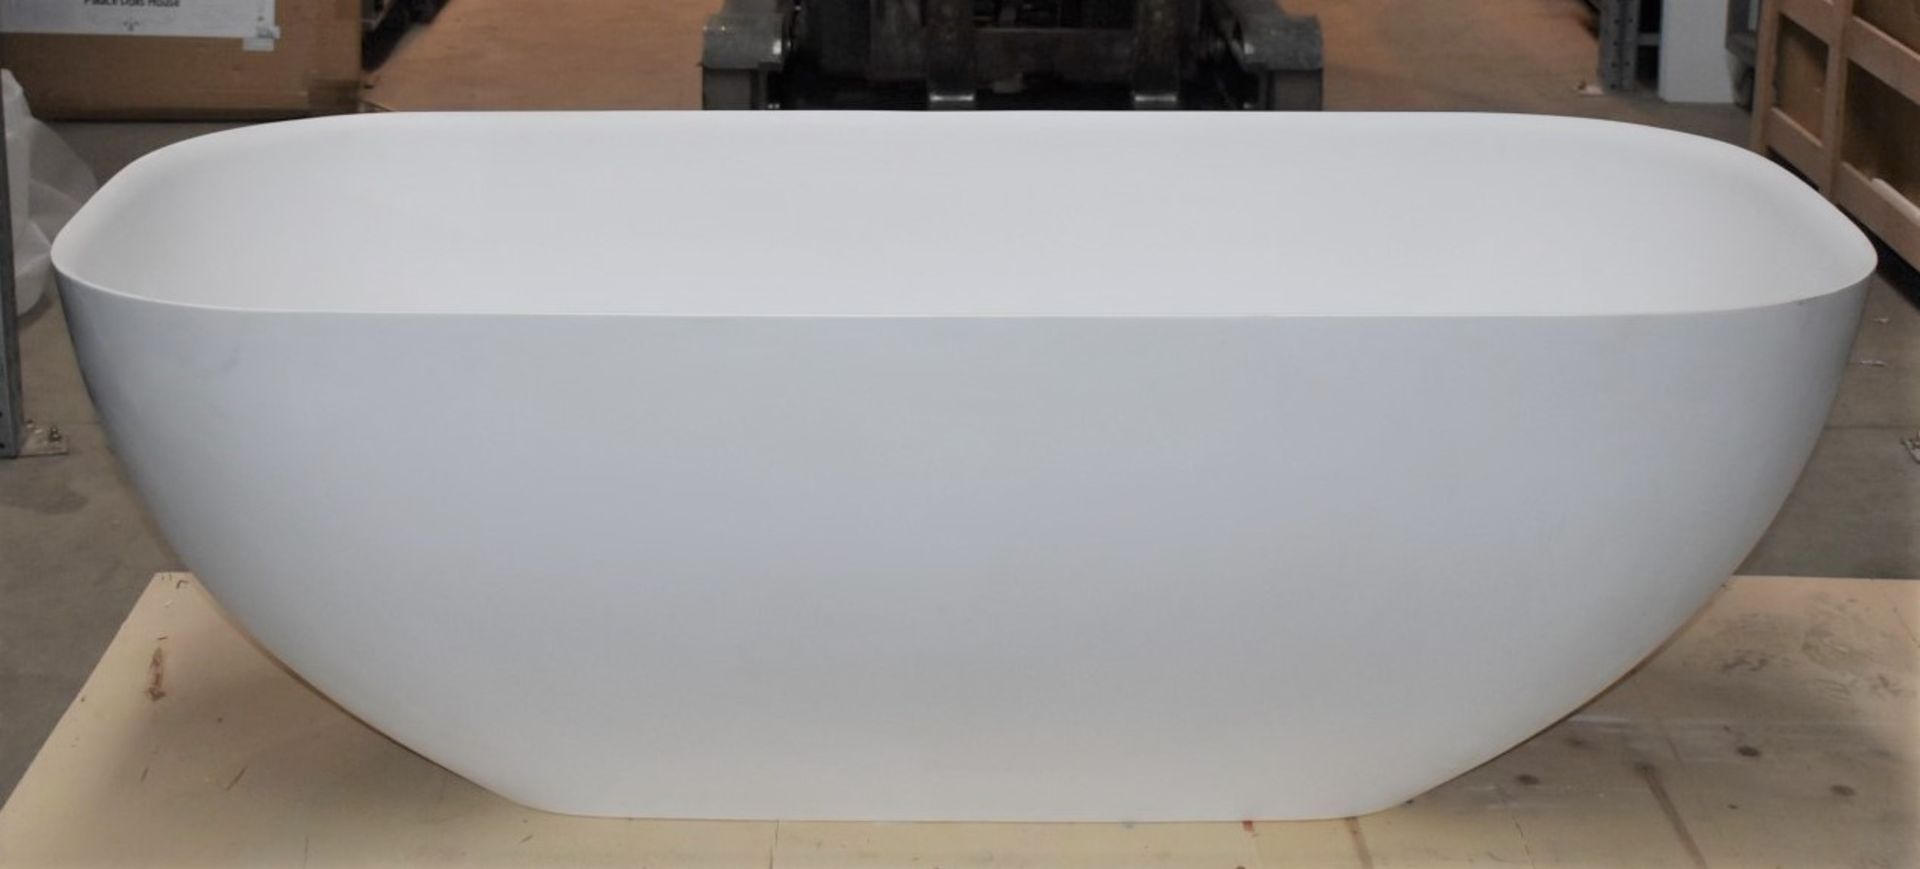 1 x Freestanding Contemporary Double Ended Acrylic Bath Finished in White - Dimensions: - Image 6 of 14